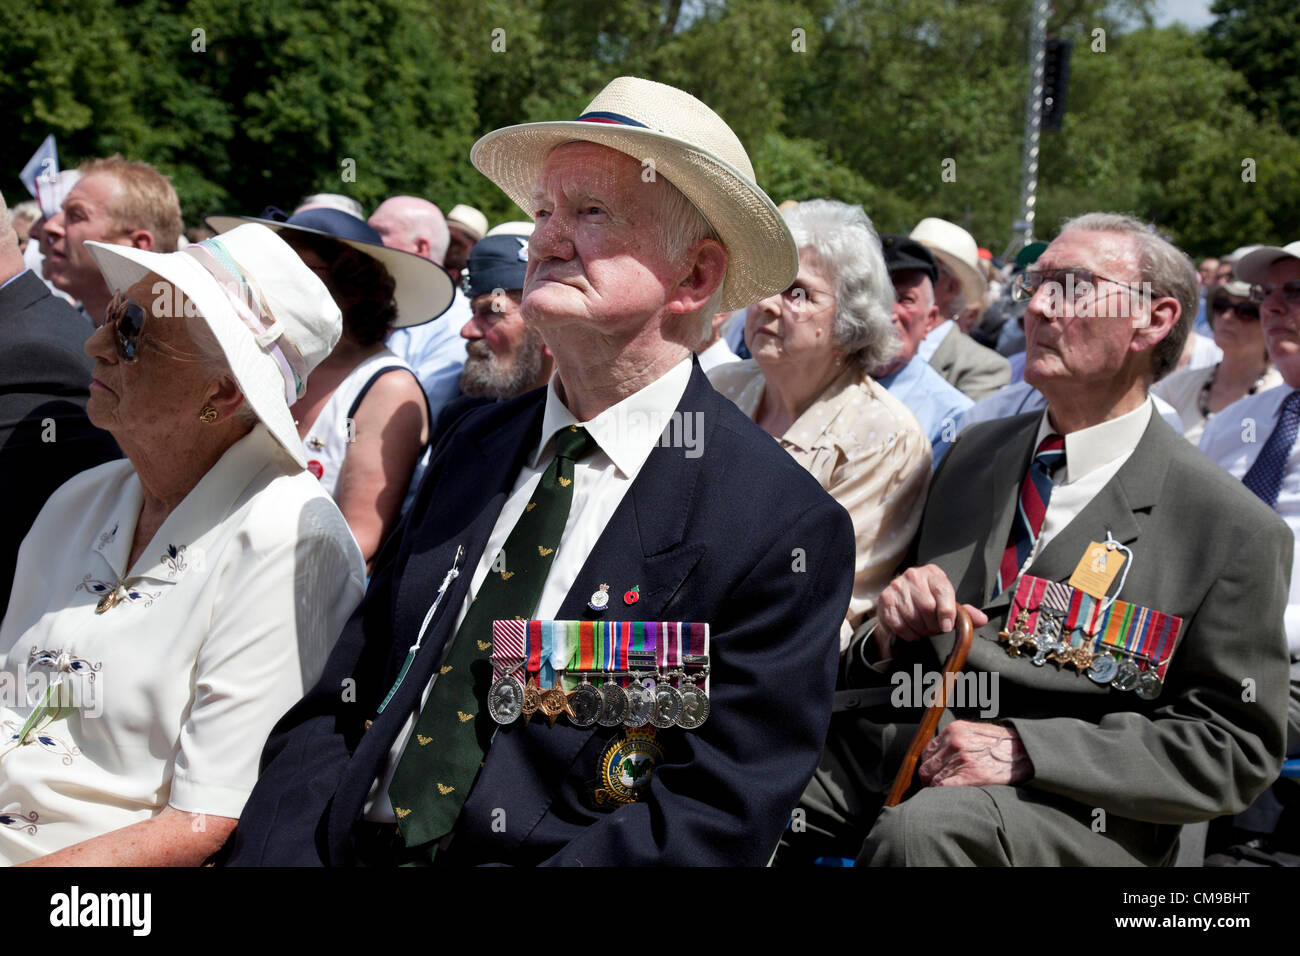 London, UK. 28/06/2012. Veterans and their families gather in Green park for a service to watch as the memorial to the 55,573 airmen of Bomber Command who died during World War II was unveiled. Some 6,000 attended the ceremony.  Stock Photo